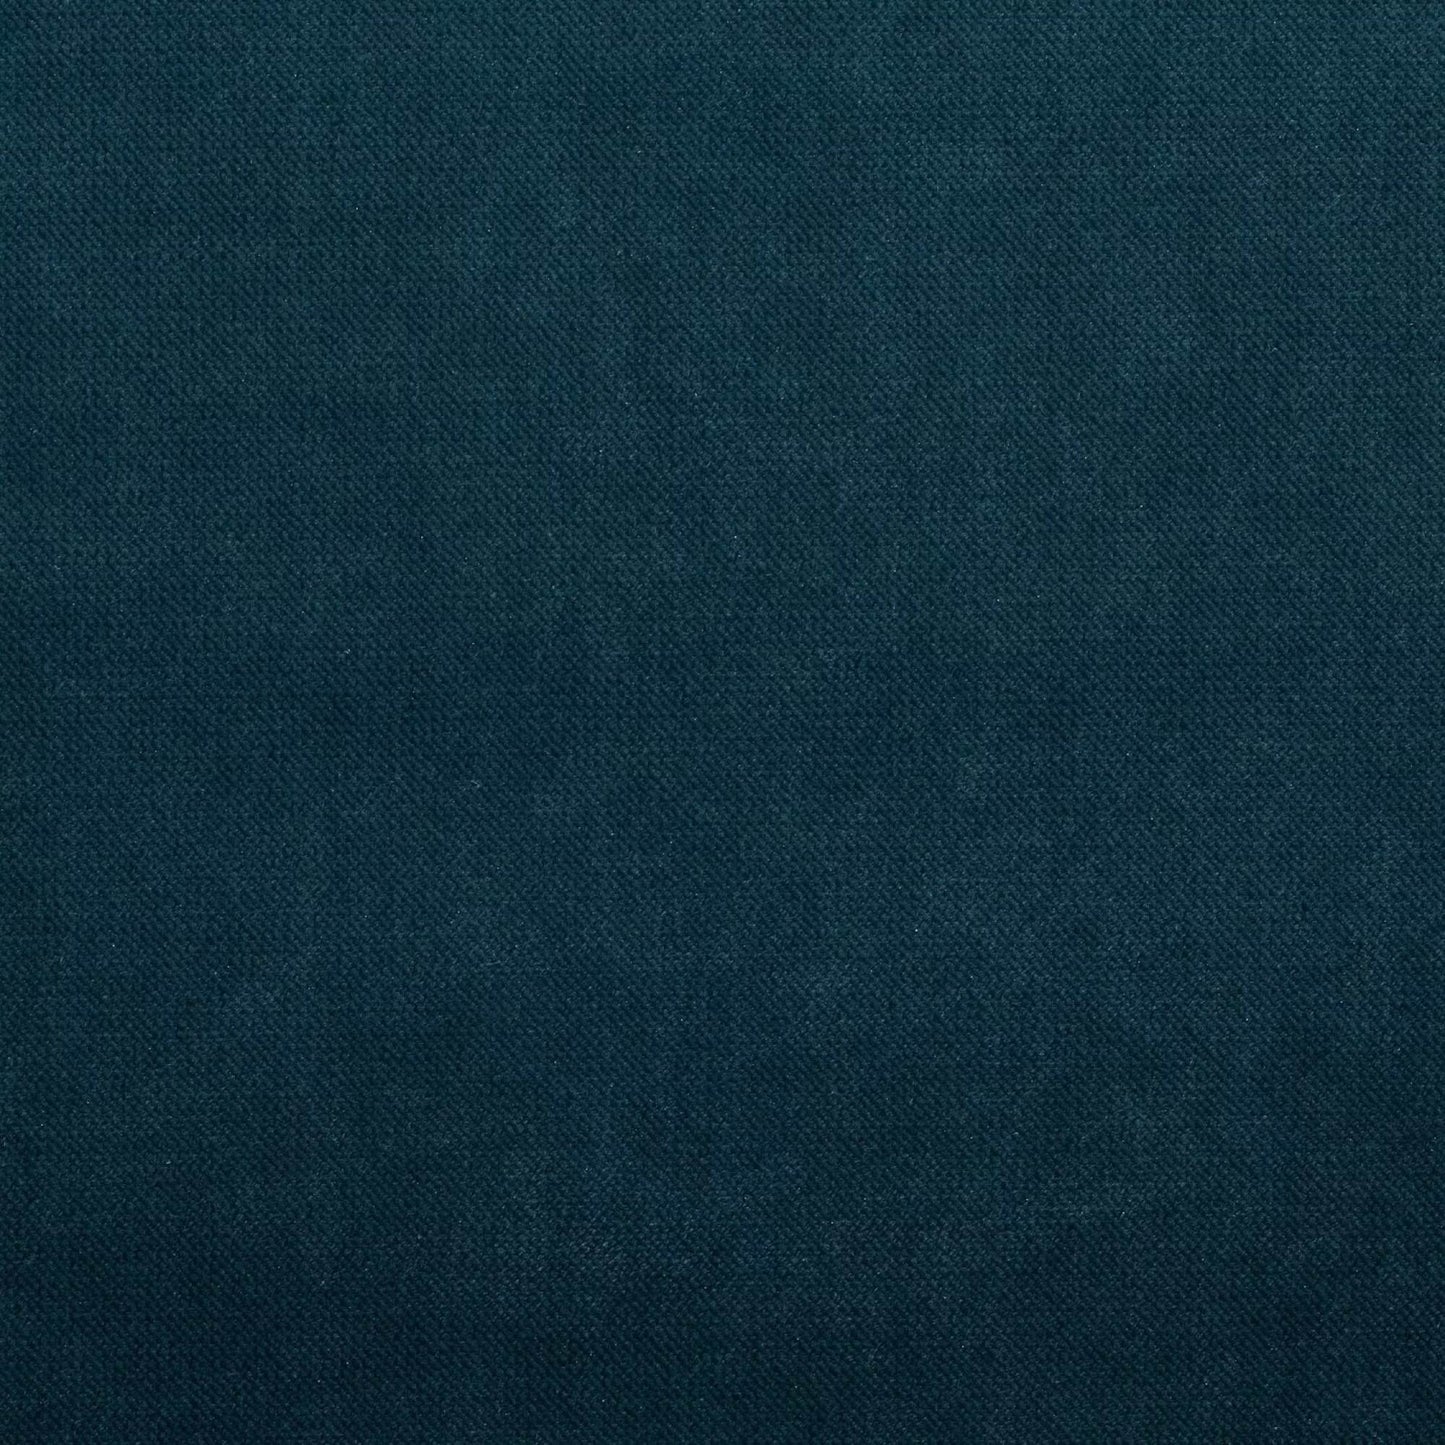 MYSTERE PEACOCK FABRIC SAMPLE | MID RANGE COLLECTION